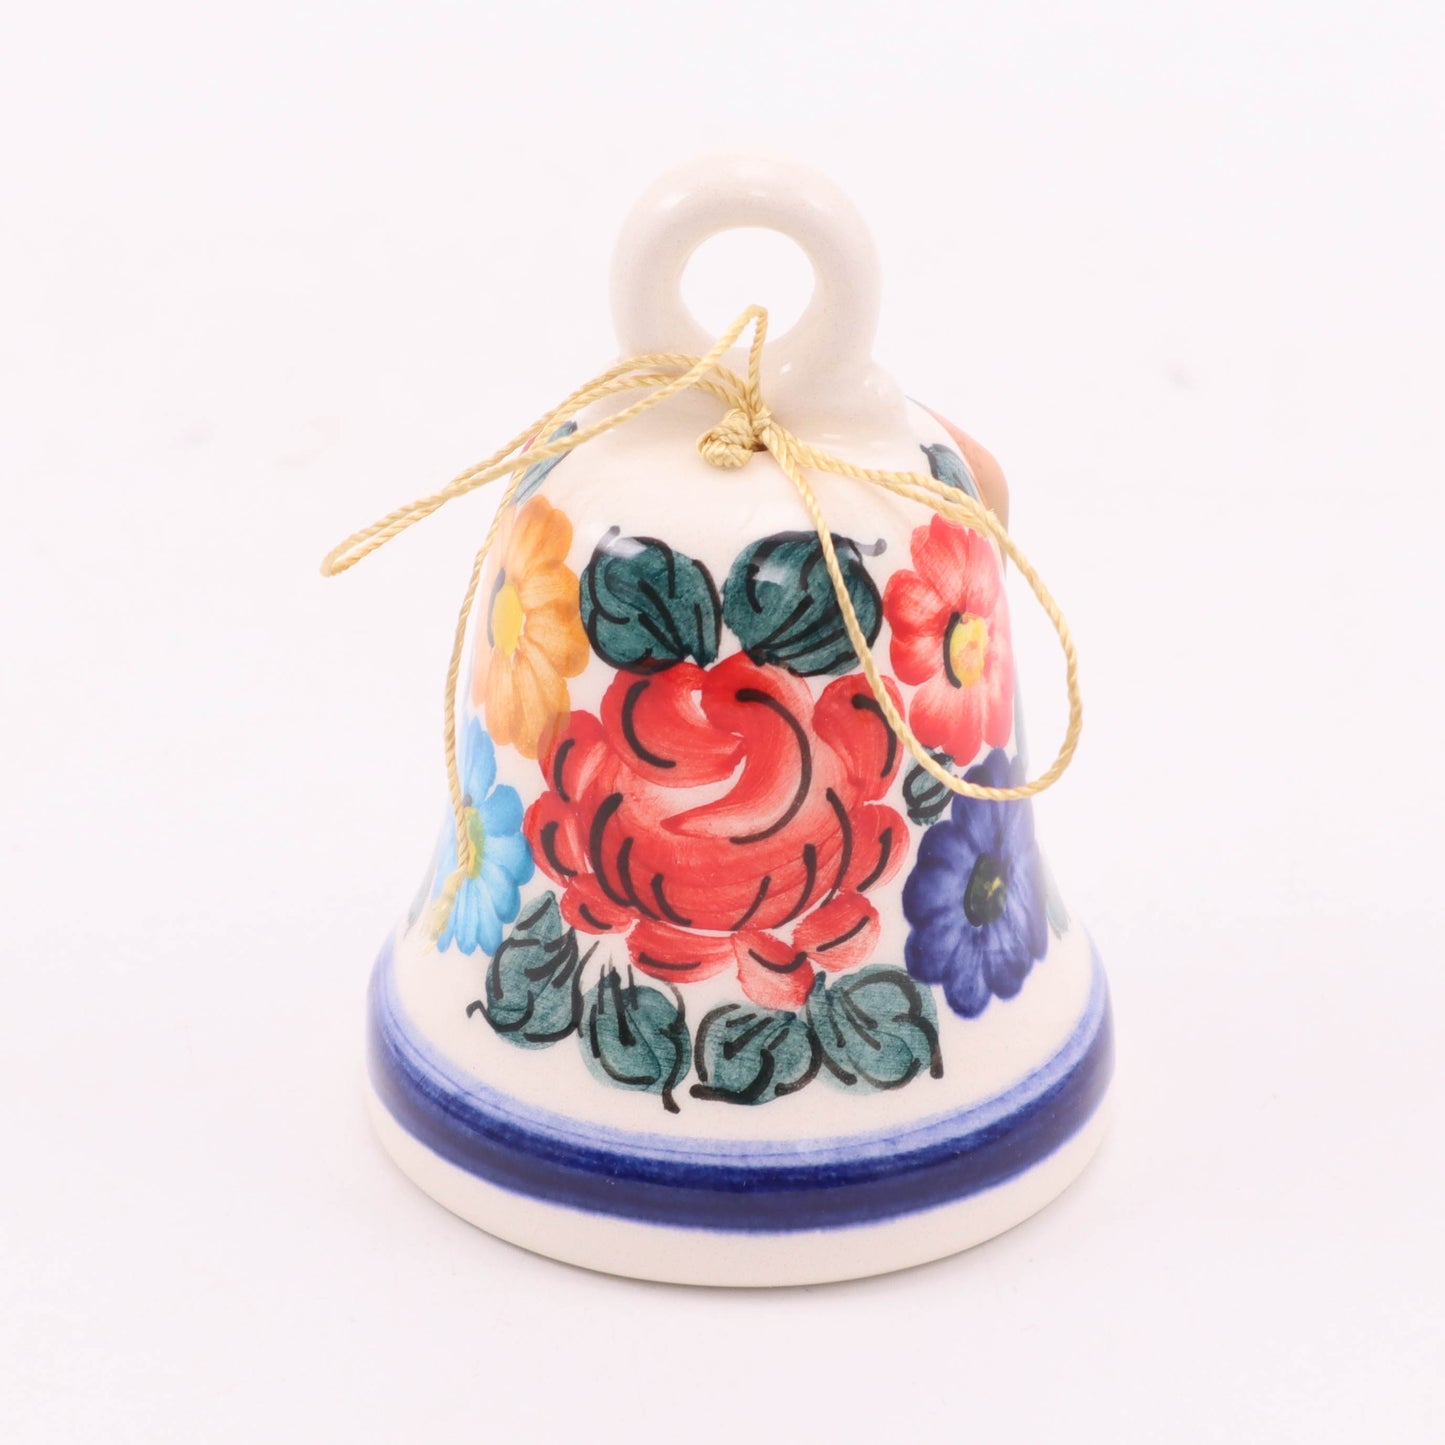 2.5"x3.5" Bell Ornament. Pattern: Colorful